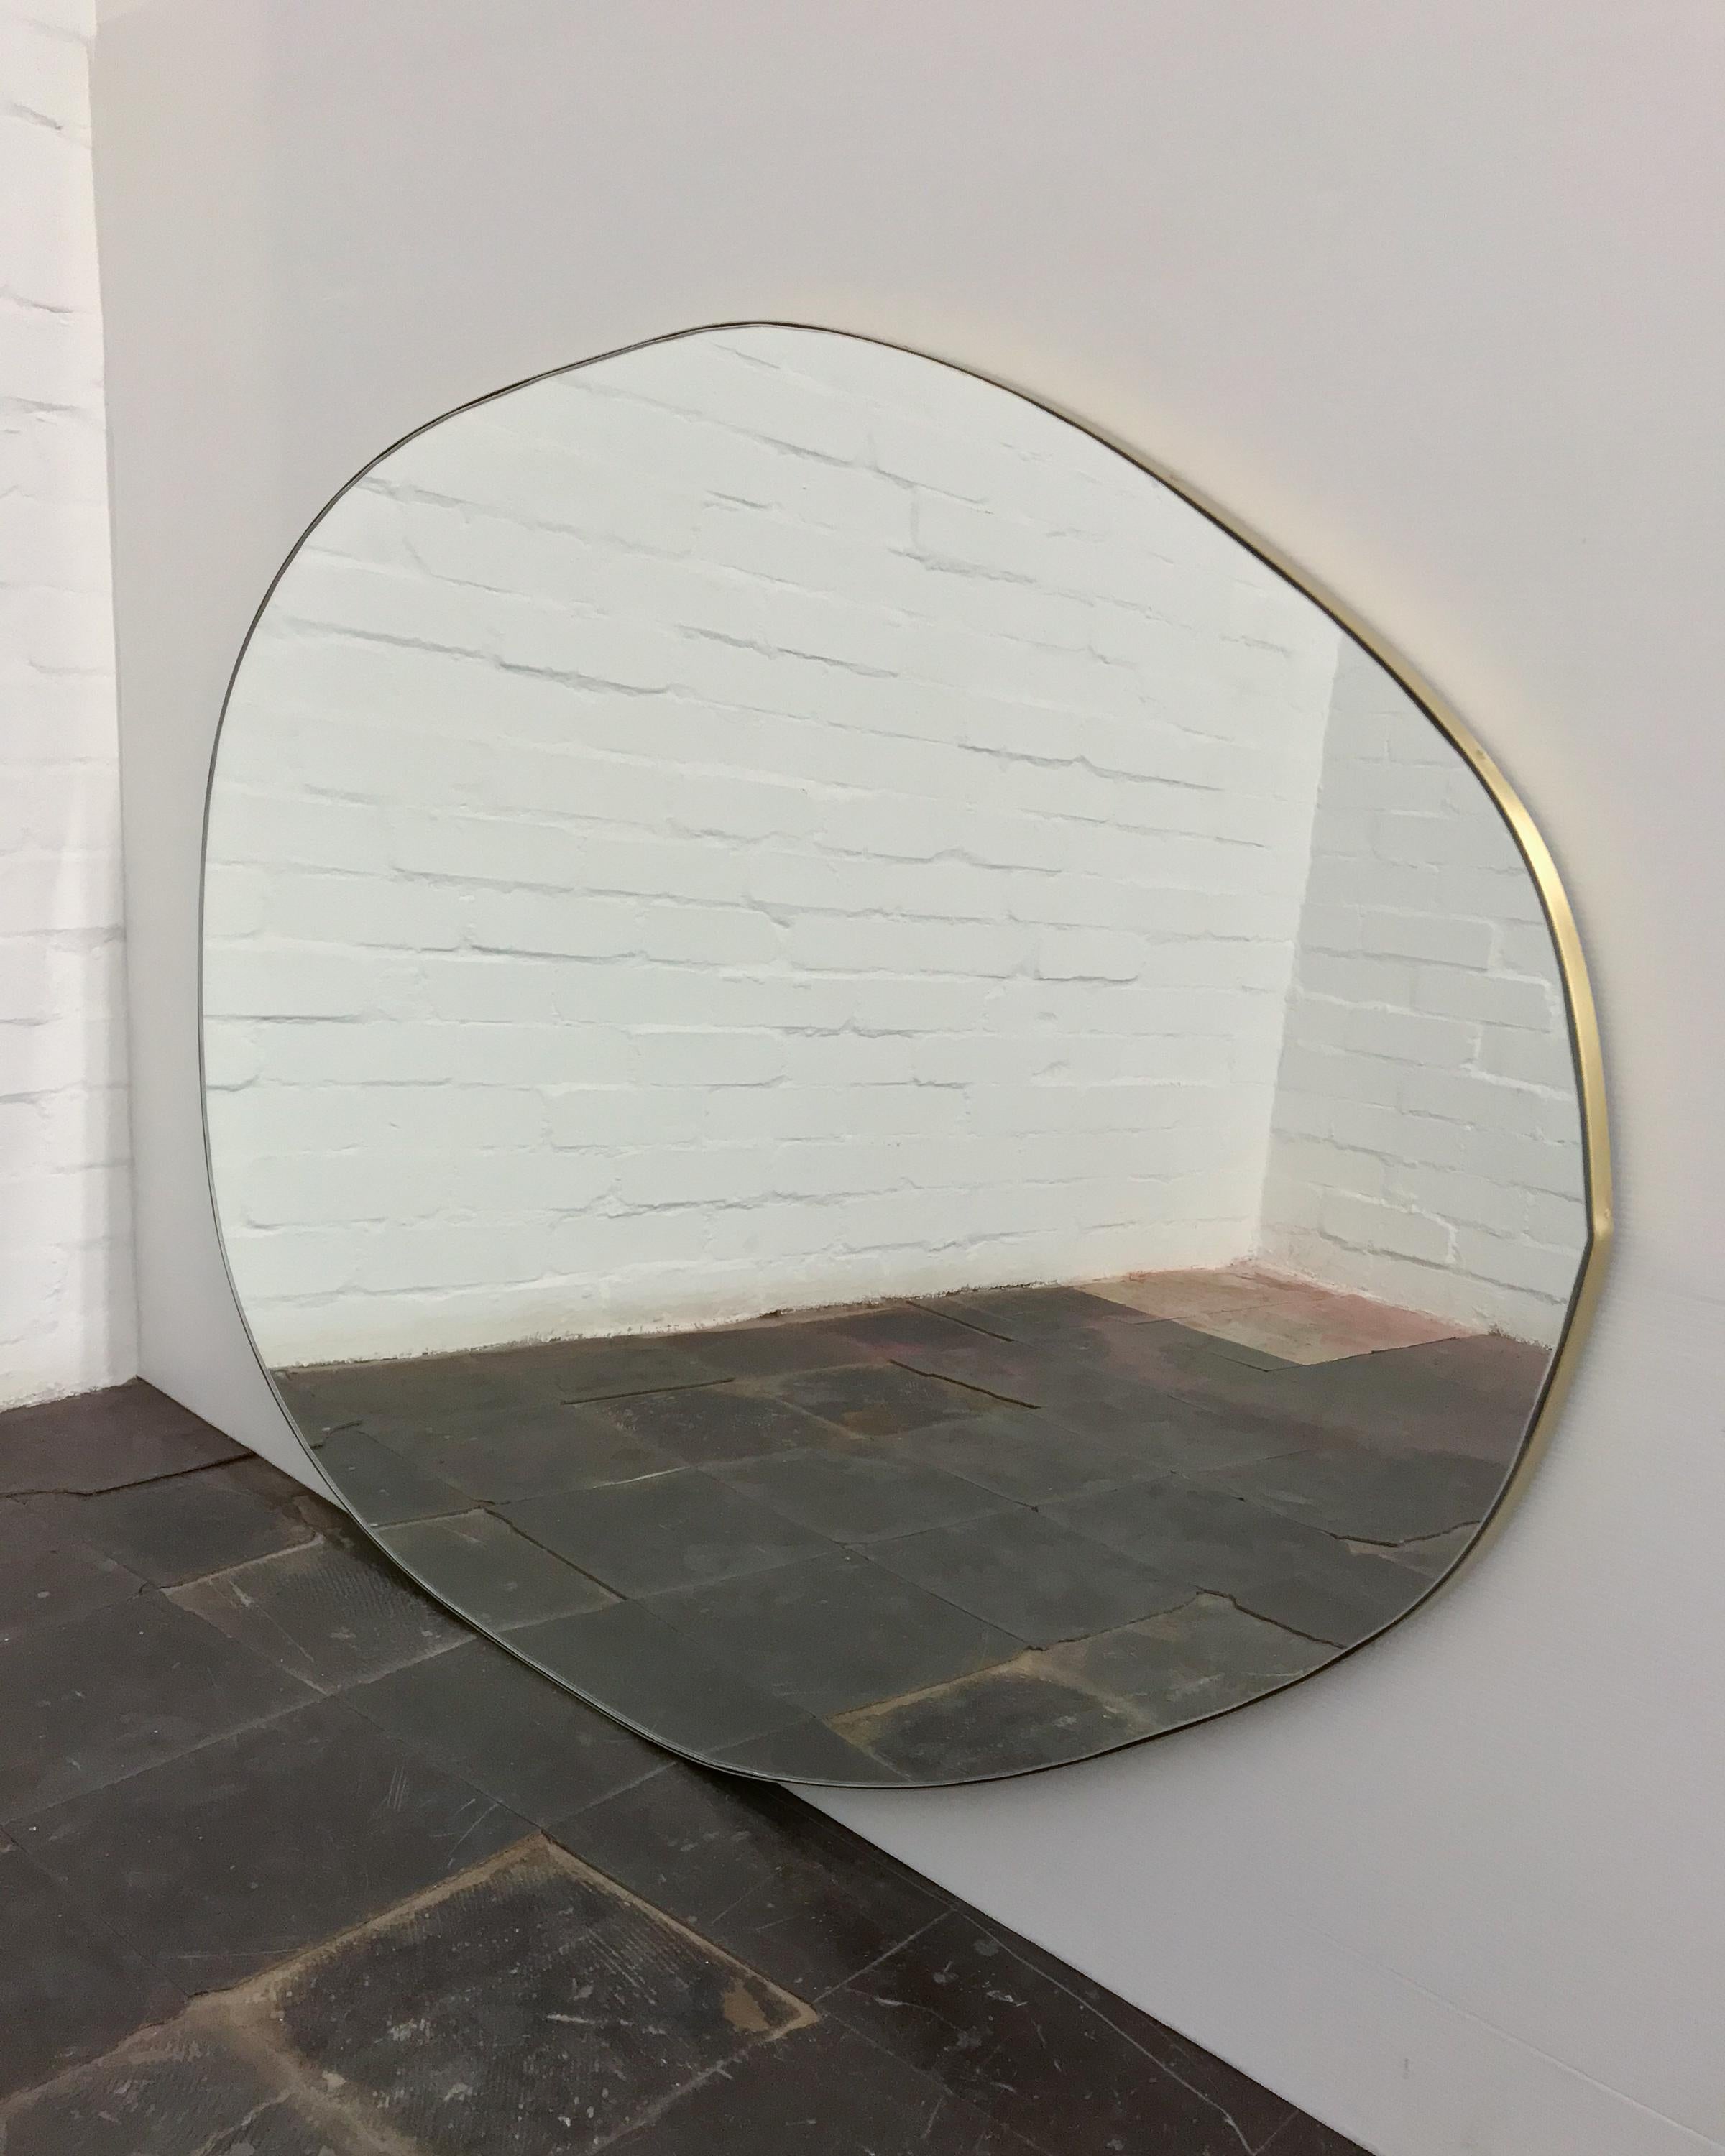 Nuva™ playful and modern organic shaped mirror with a solid brass brushed frame. Designed and made in London, UK.

Our mirrors are designed with an integrated French cleat (split batten) system that ensures the mirror is securely mounted flush with